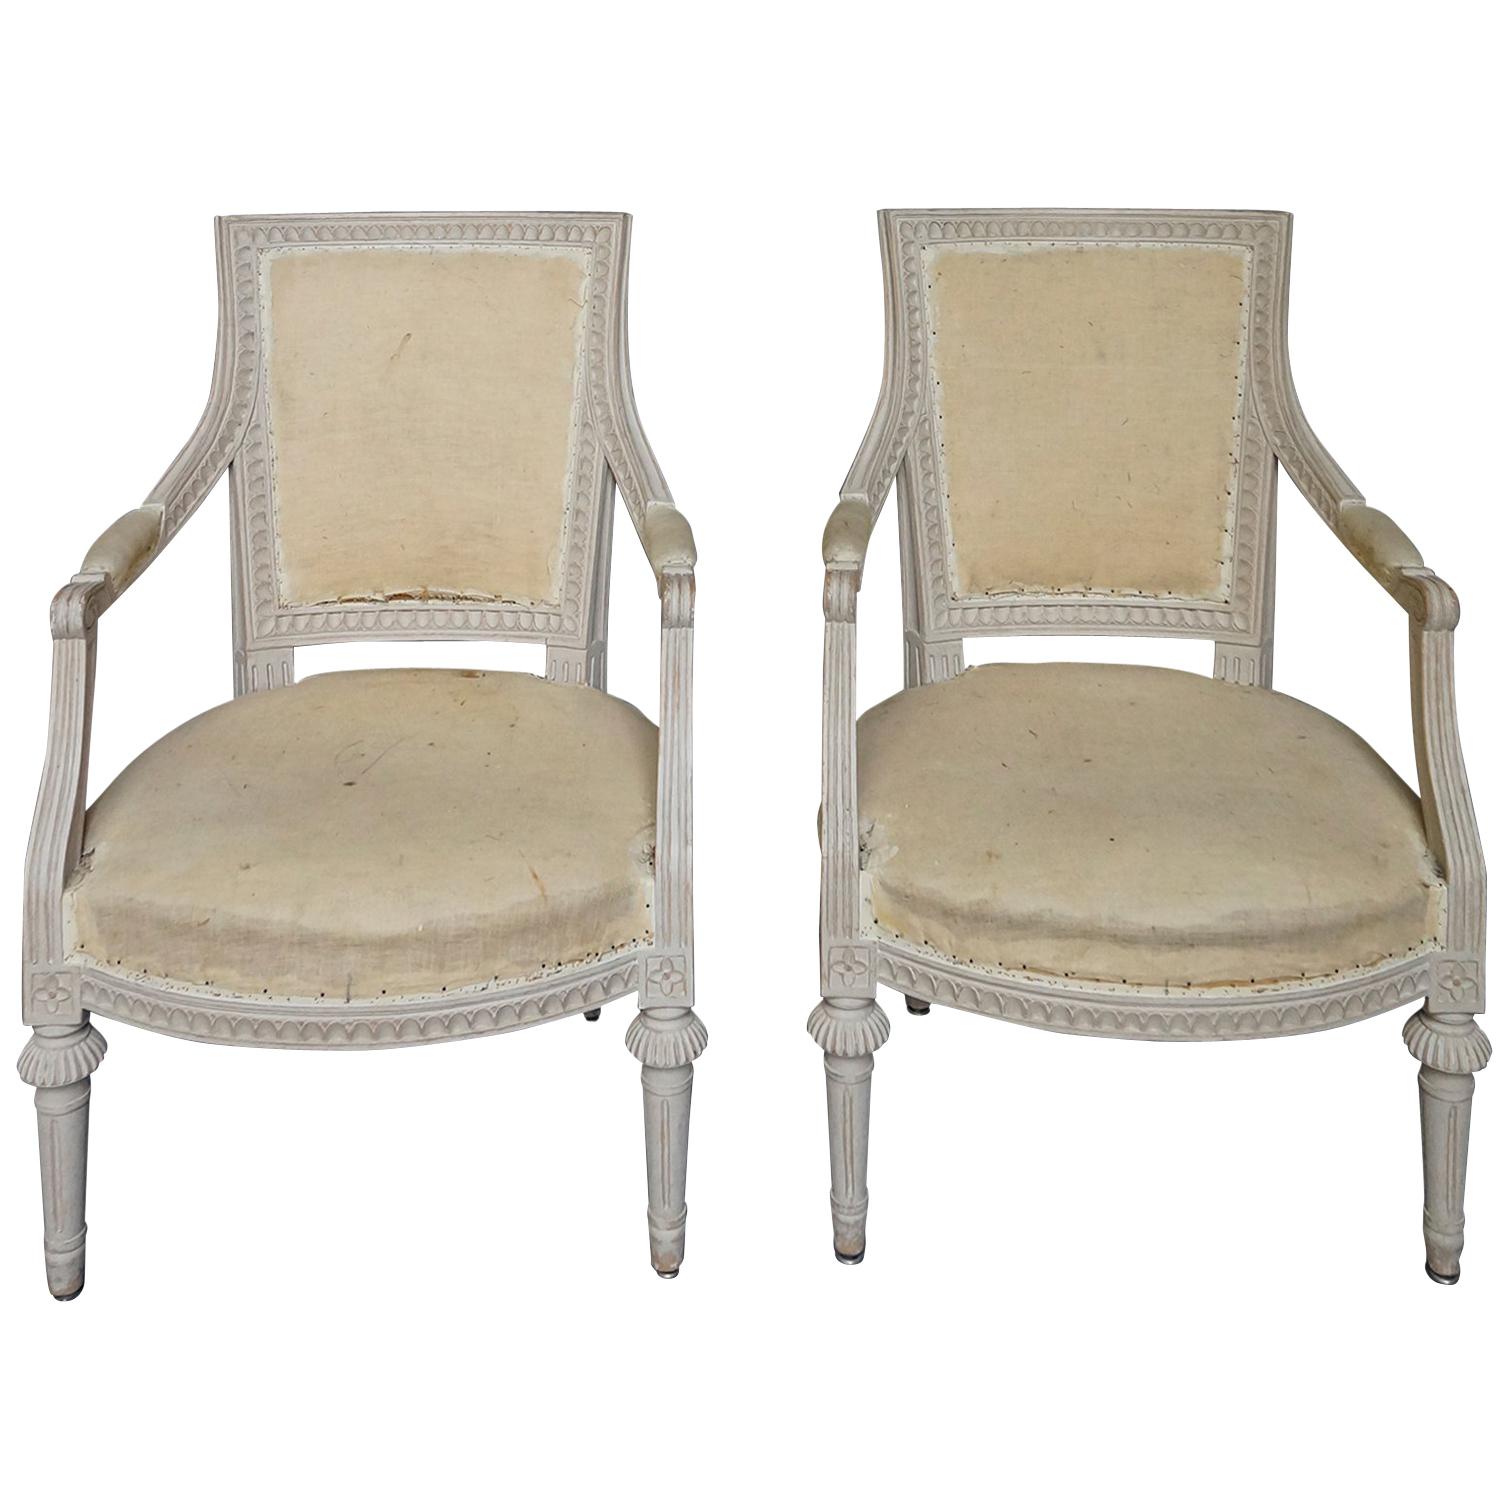 Pair of Square-Backed Gustavian Style Armchairs